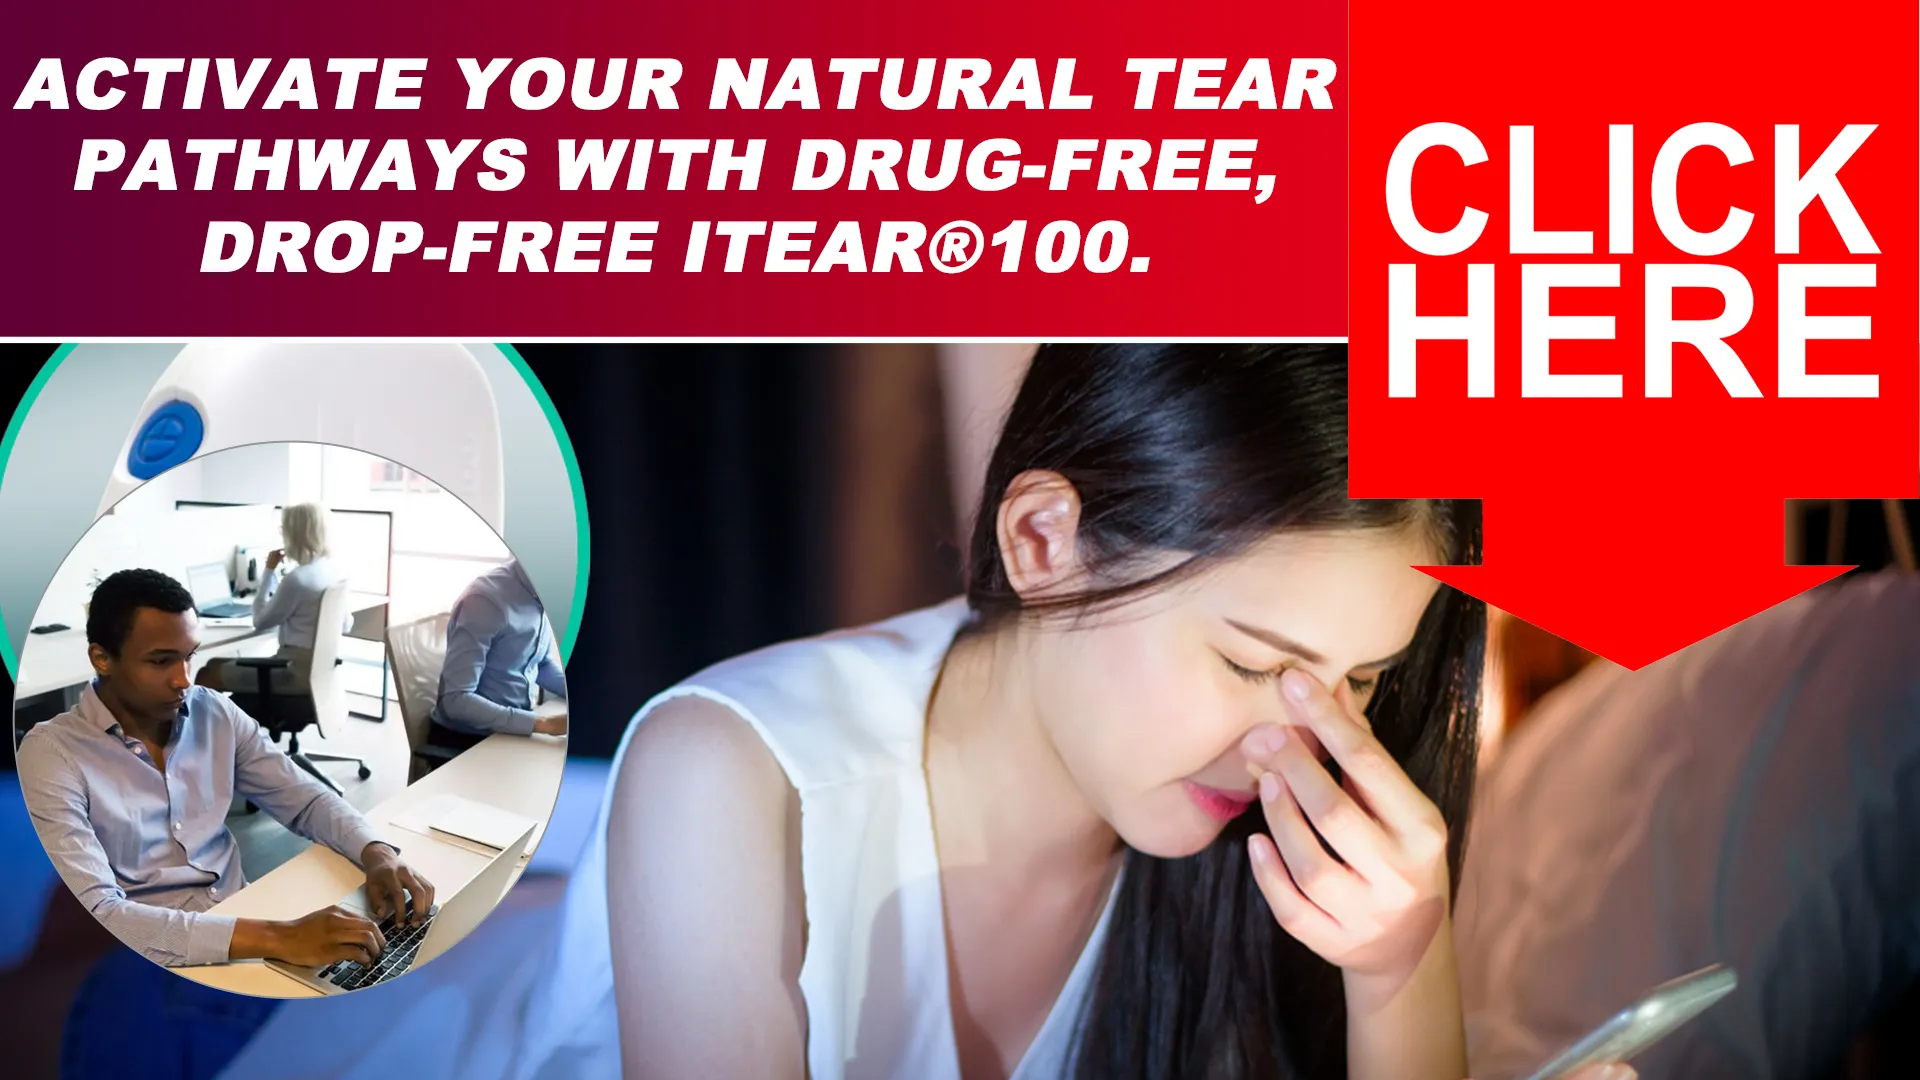 The iTEAR100 Device: Your At-home Oasis for Natural Tear Production